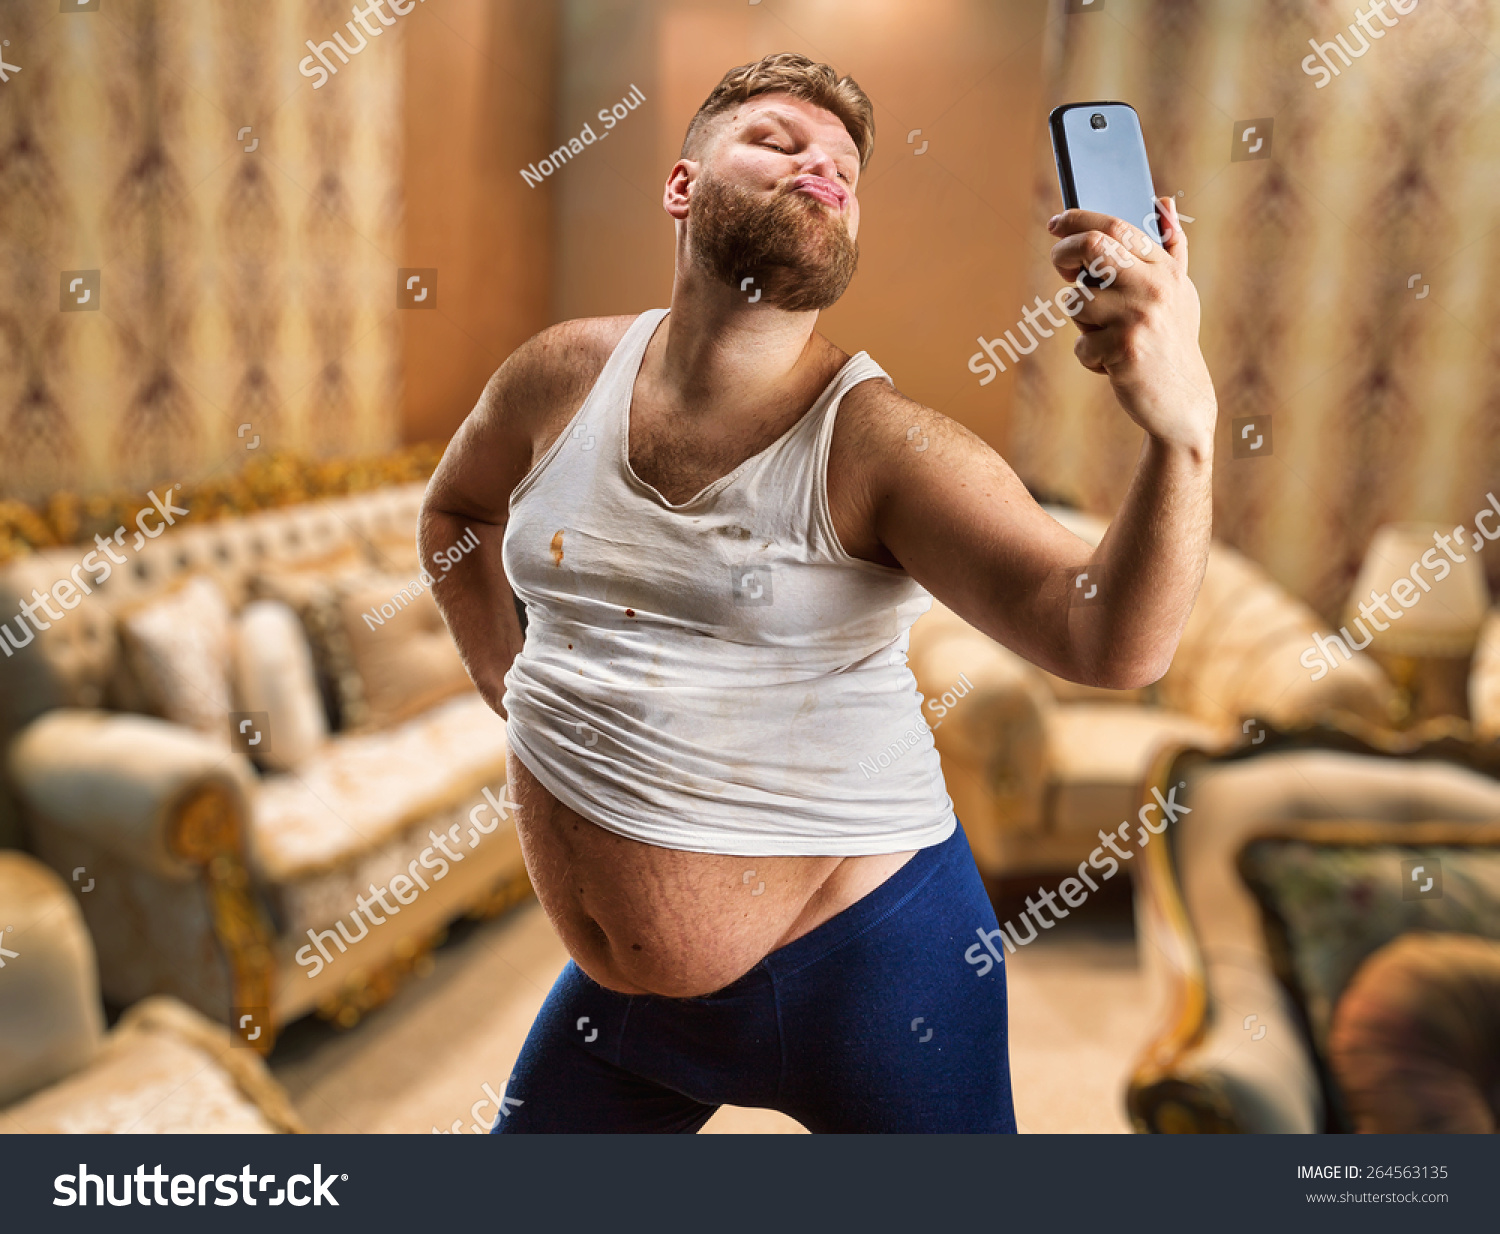 Fat Glamour Man With Beard Takes Selfie In His Bedroom